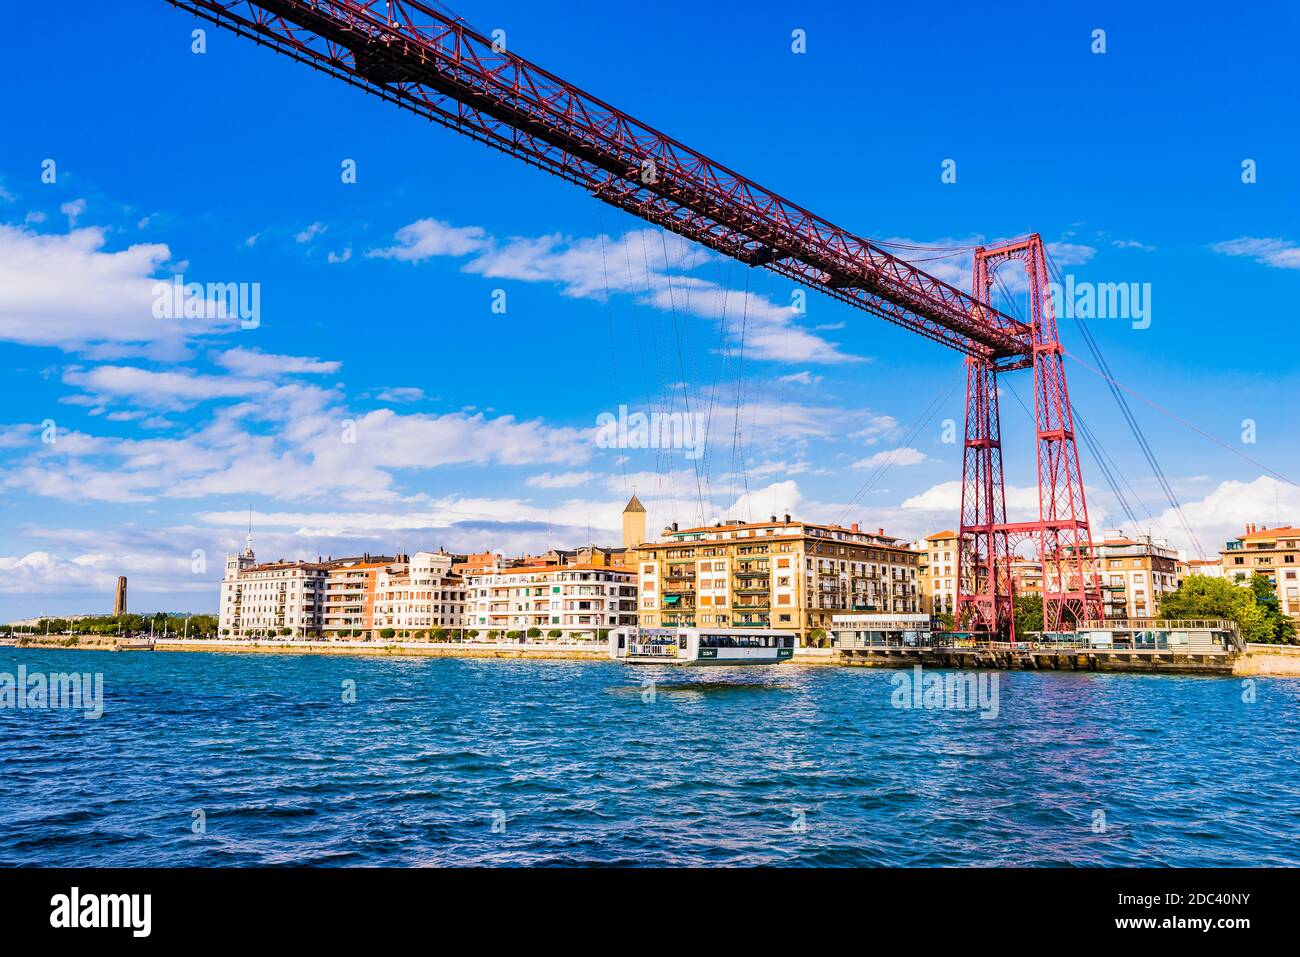 The Vizcaya Bridge is a transporter bridge that links the towns of Portugalete and Las Arenas, part of Getxo, in the Biscay province of Spain, crossin Stock Photo